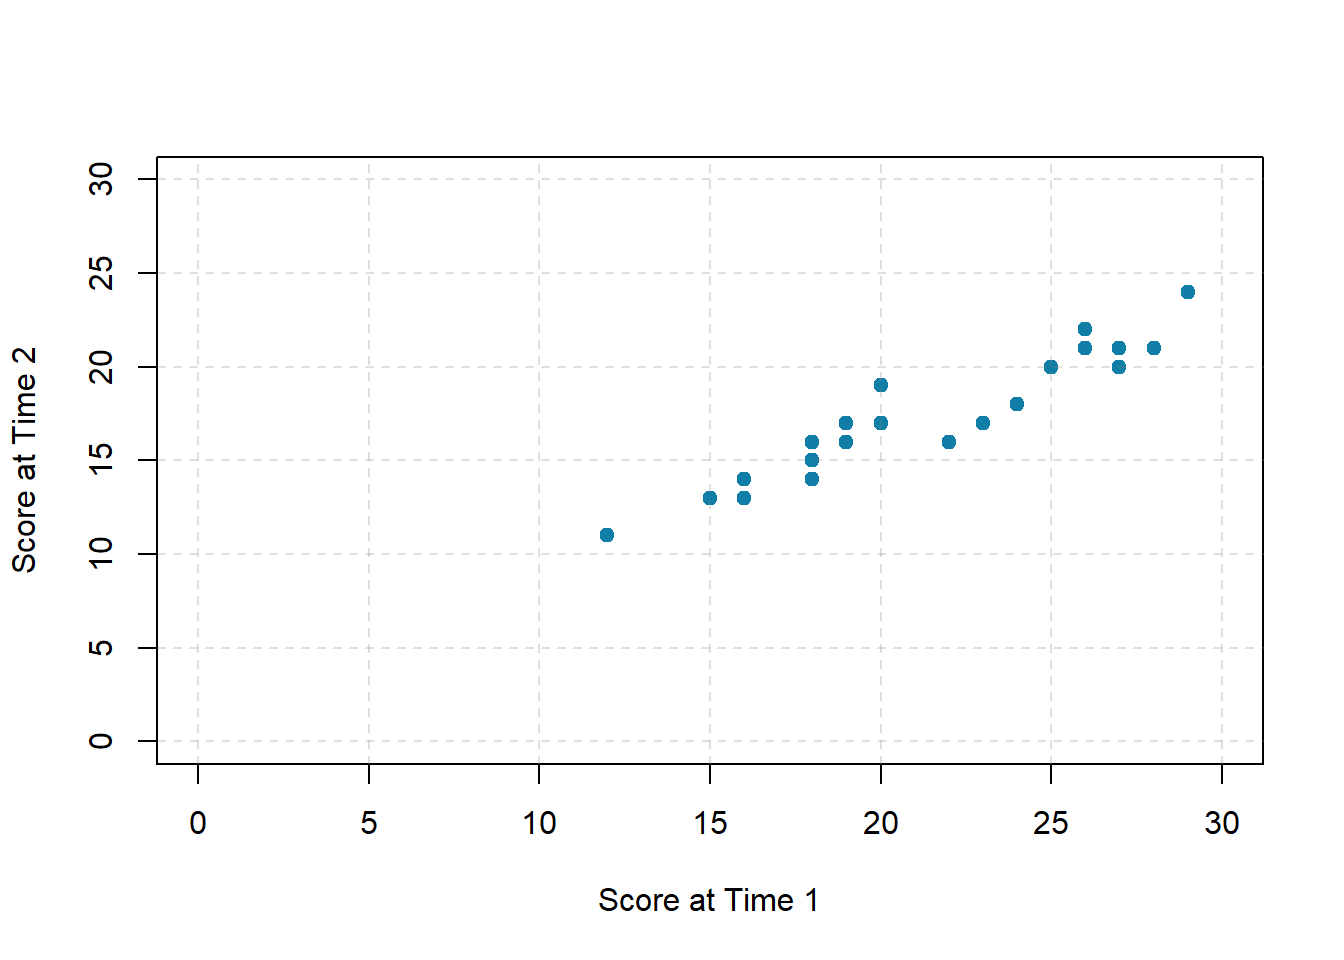 Test-retest correlation between two sets of scores of several college students on the Rosenberg self-esteem scale, given two times a week apart.